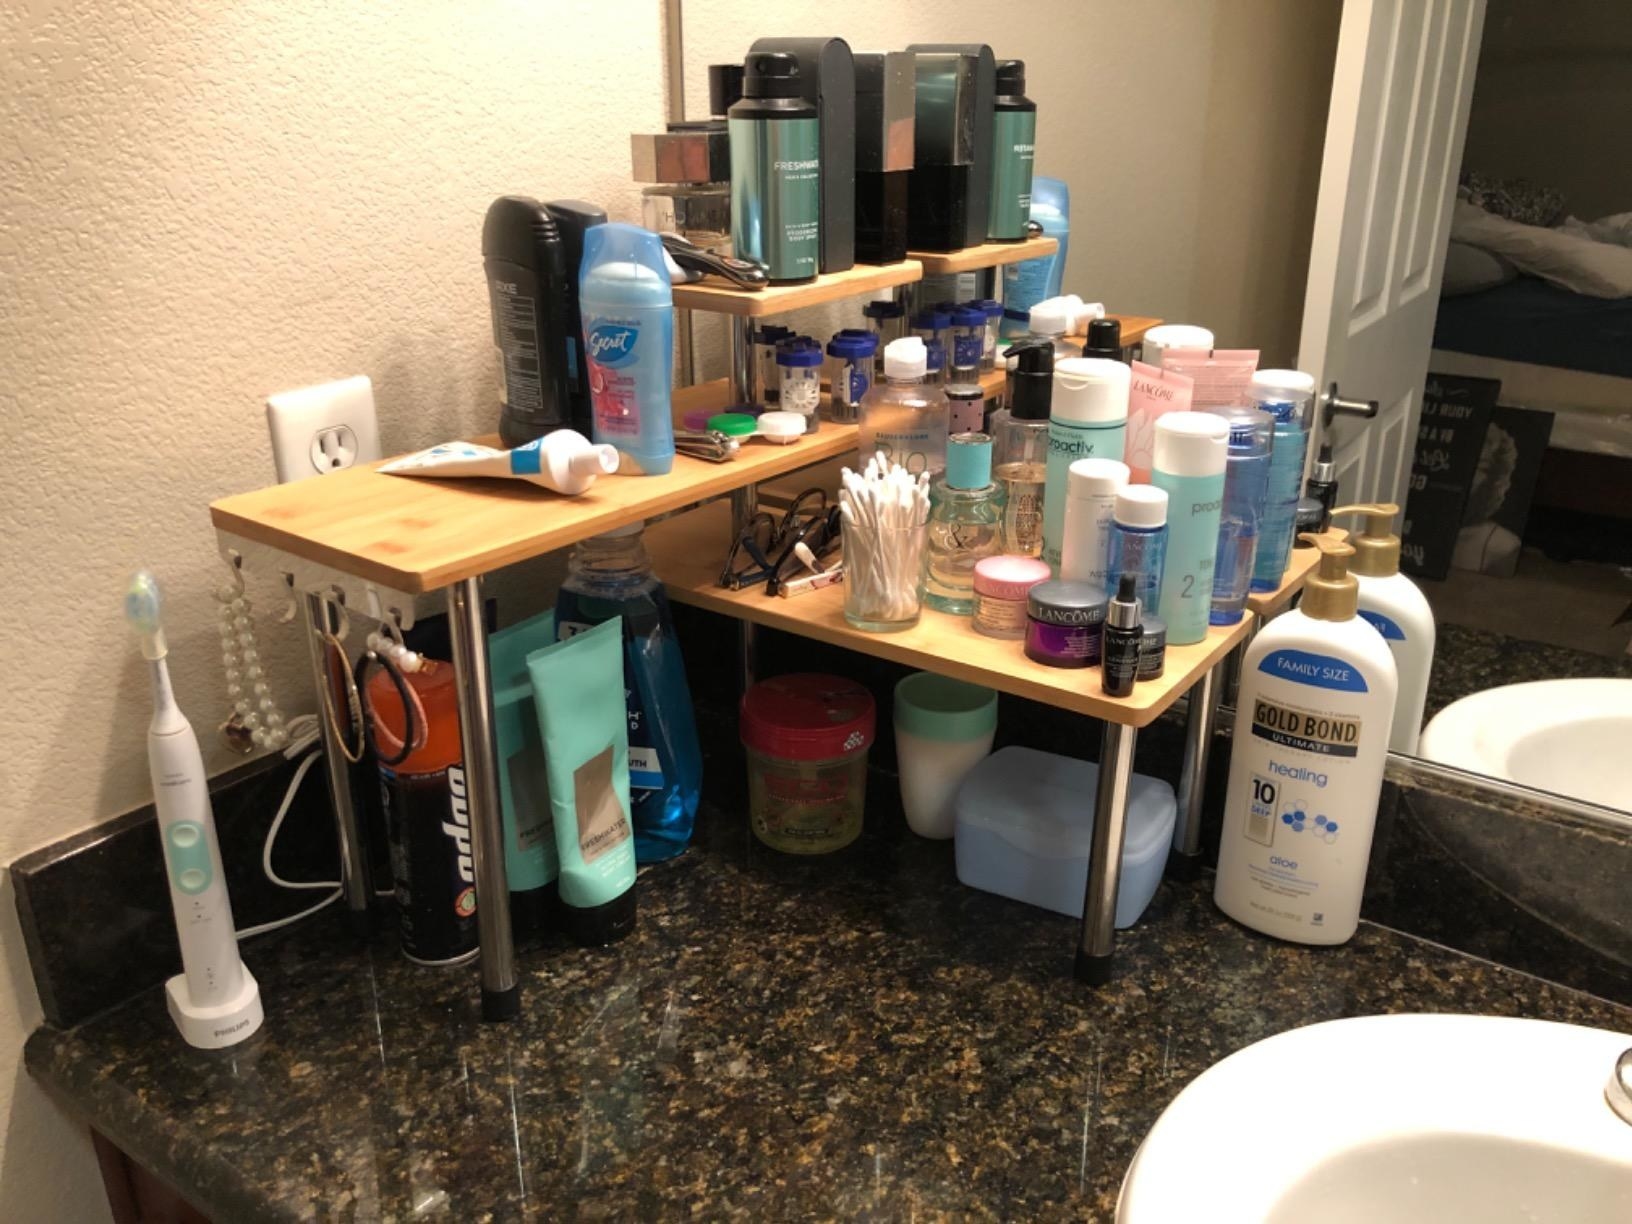 A three-tier rack in the corner of a bathroom counter